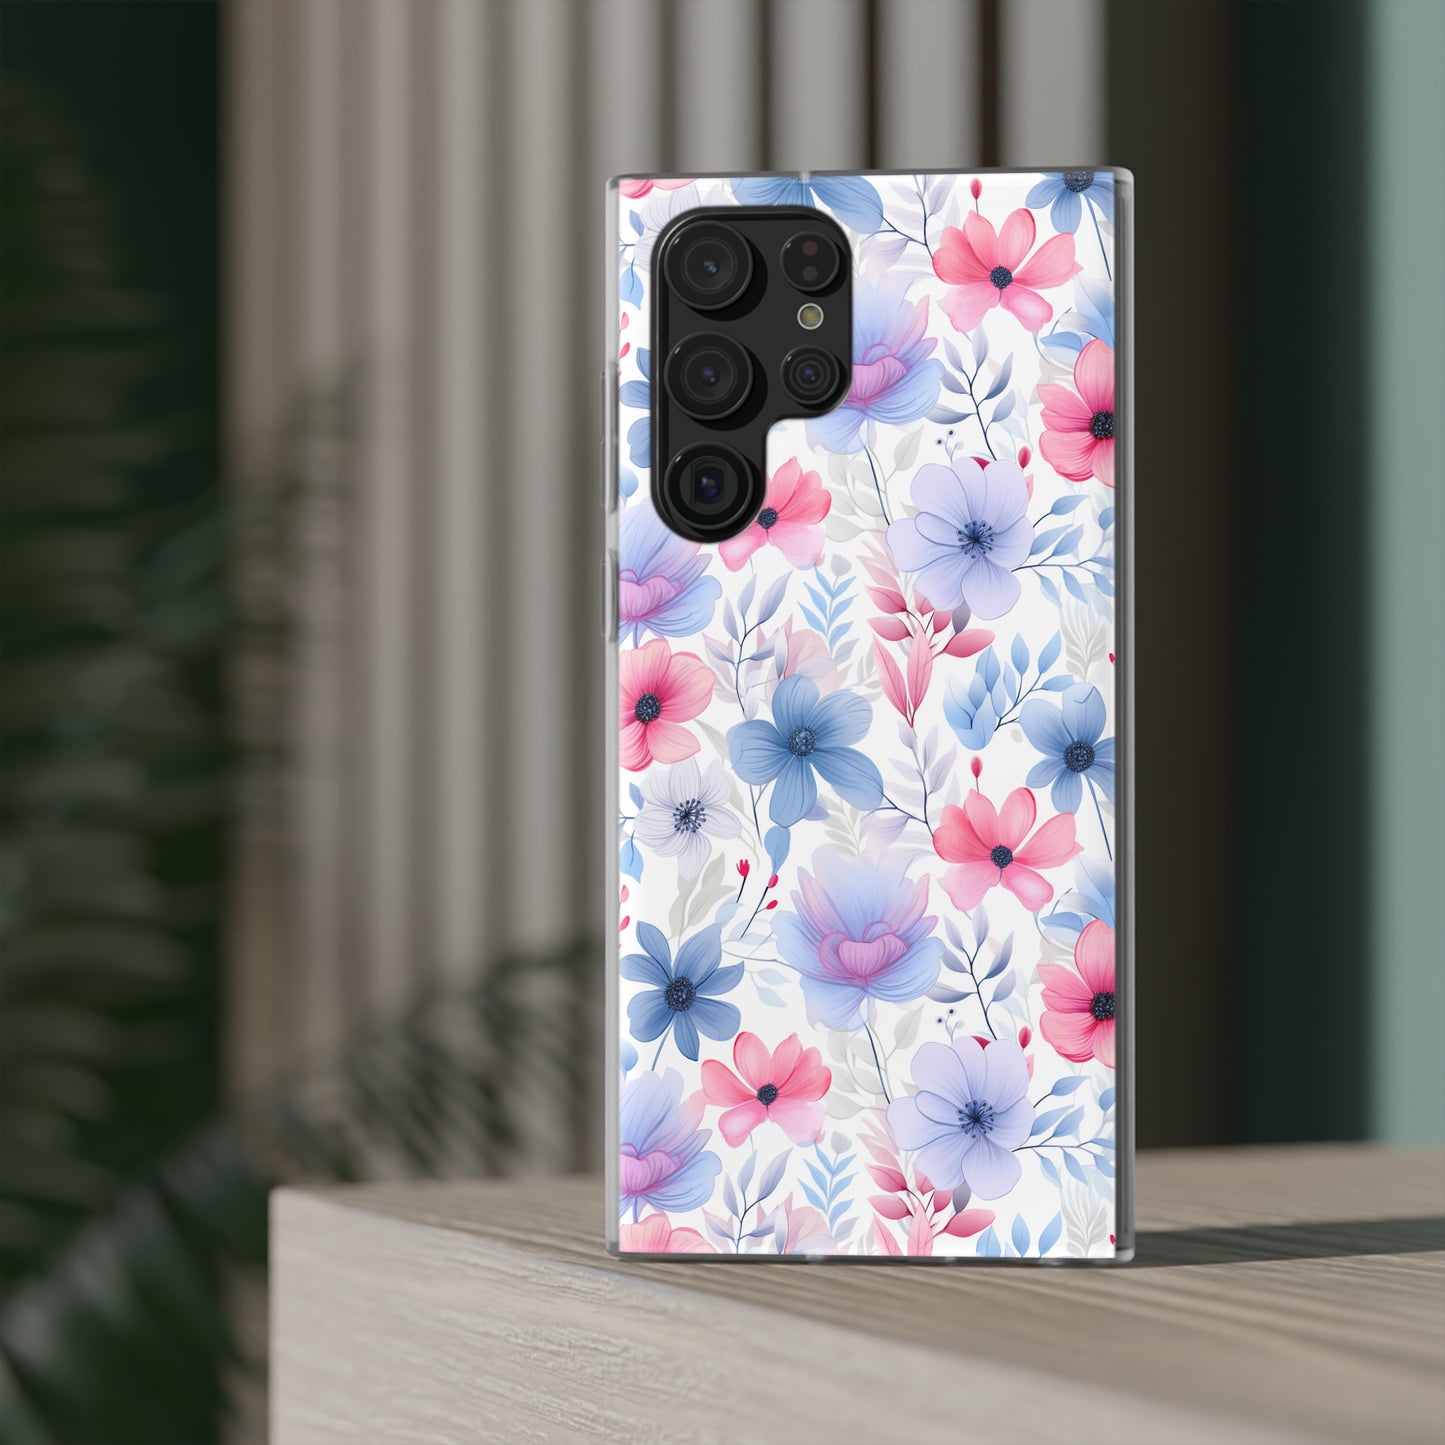 Floral Whispers - Soft Hues of Violets, Pinks, and Blues - Flexi Phone Case Phone Case Pattern Symphony Samsung Galaxy S22 Ultra with gift packaging  